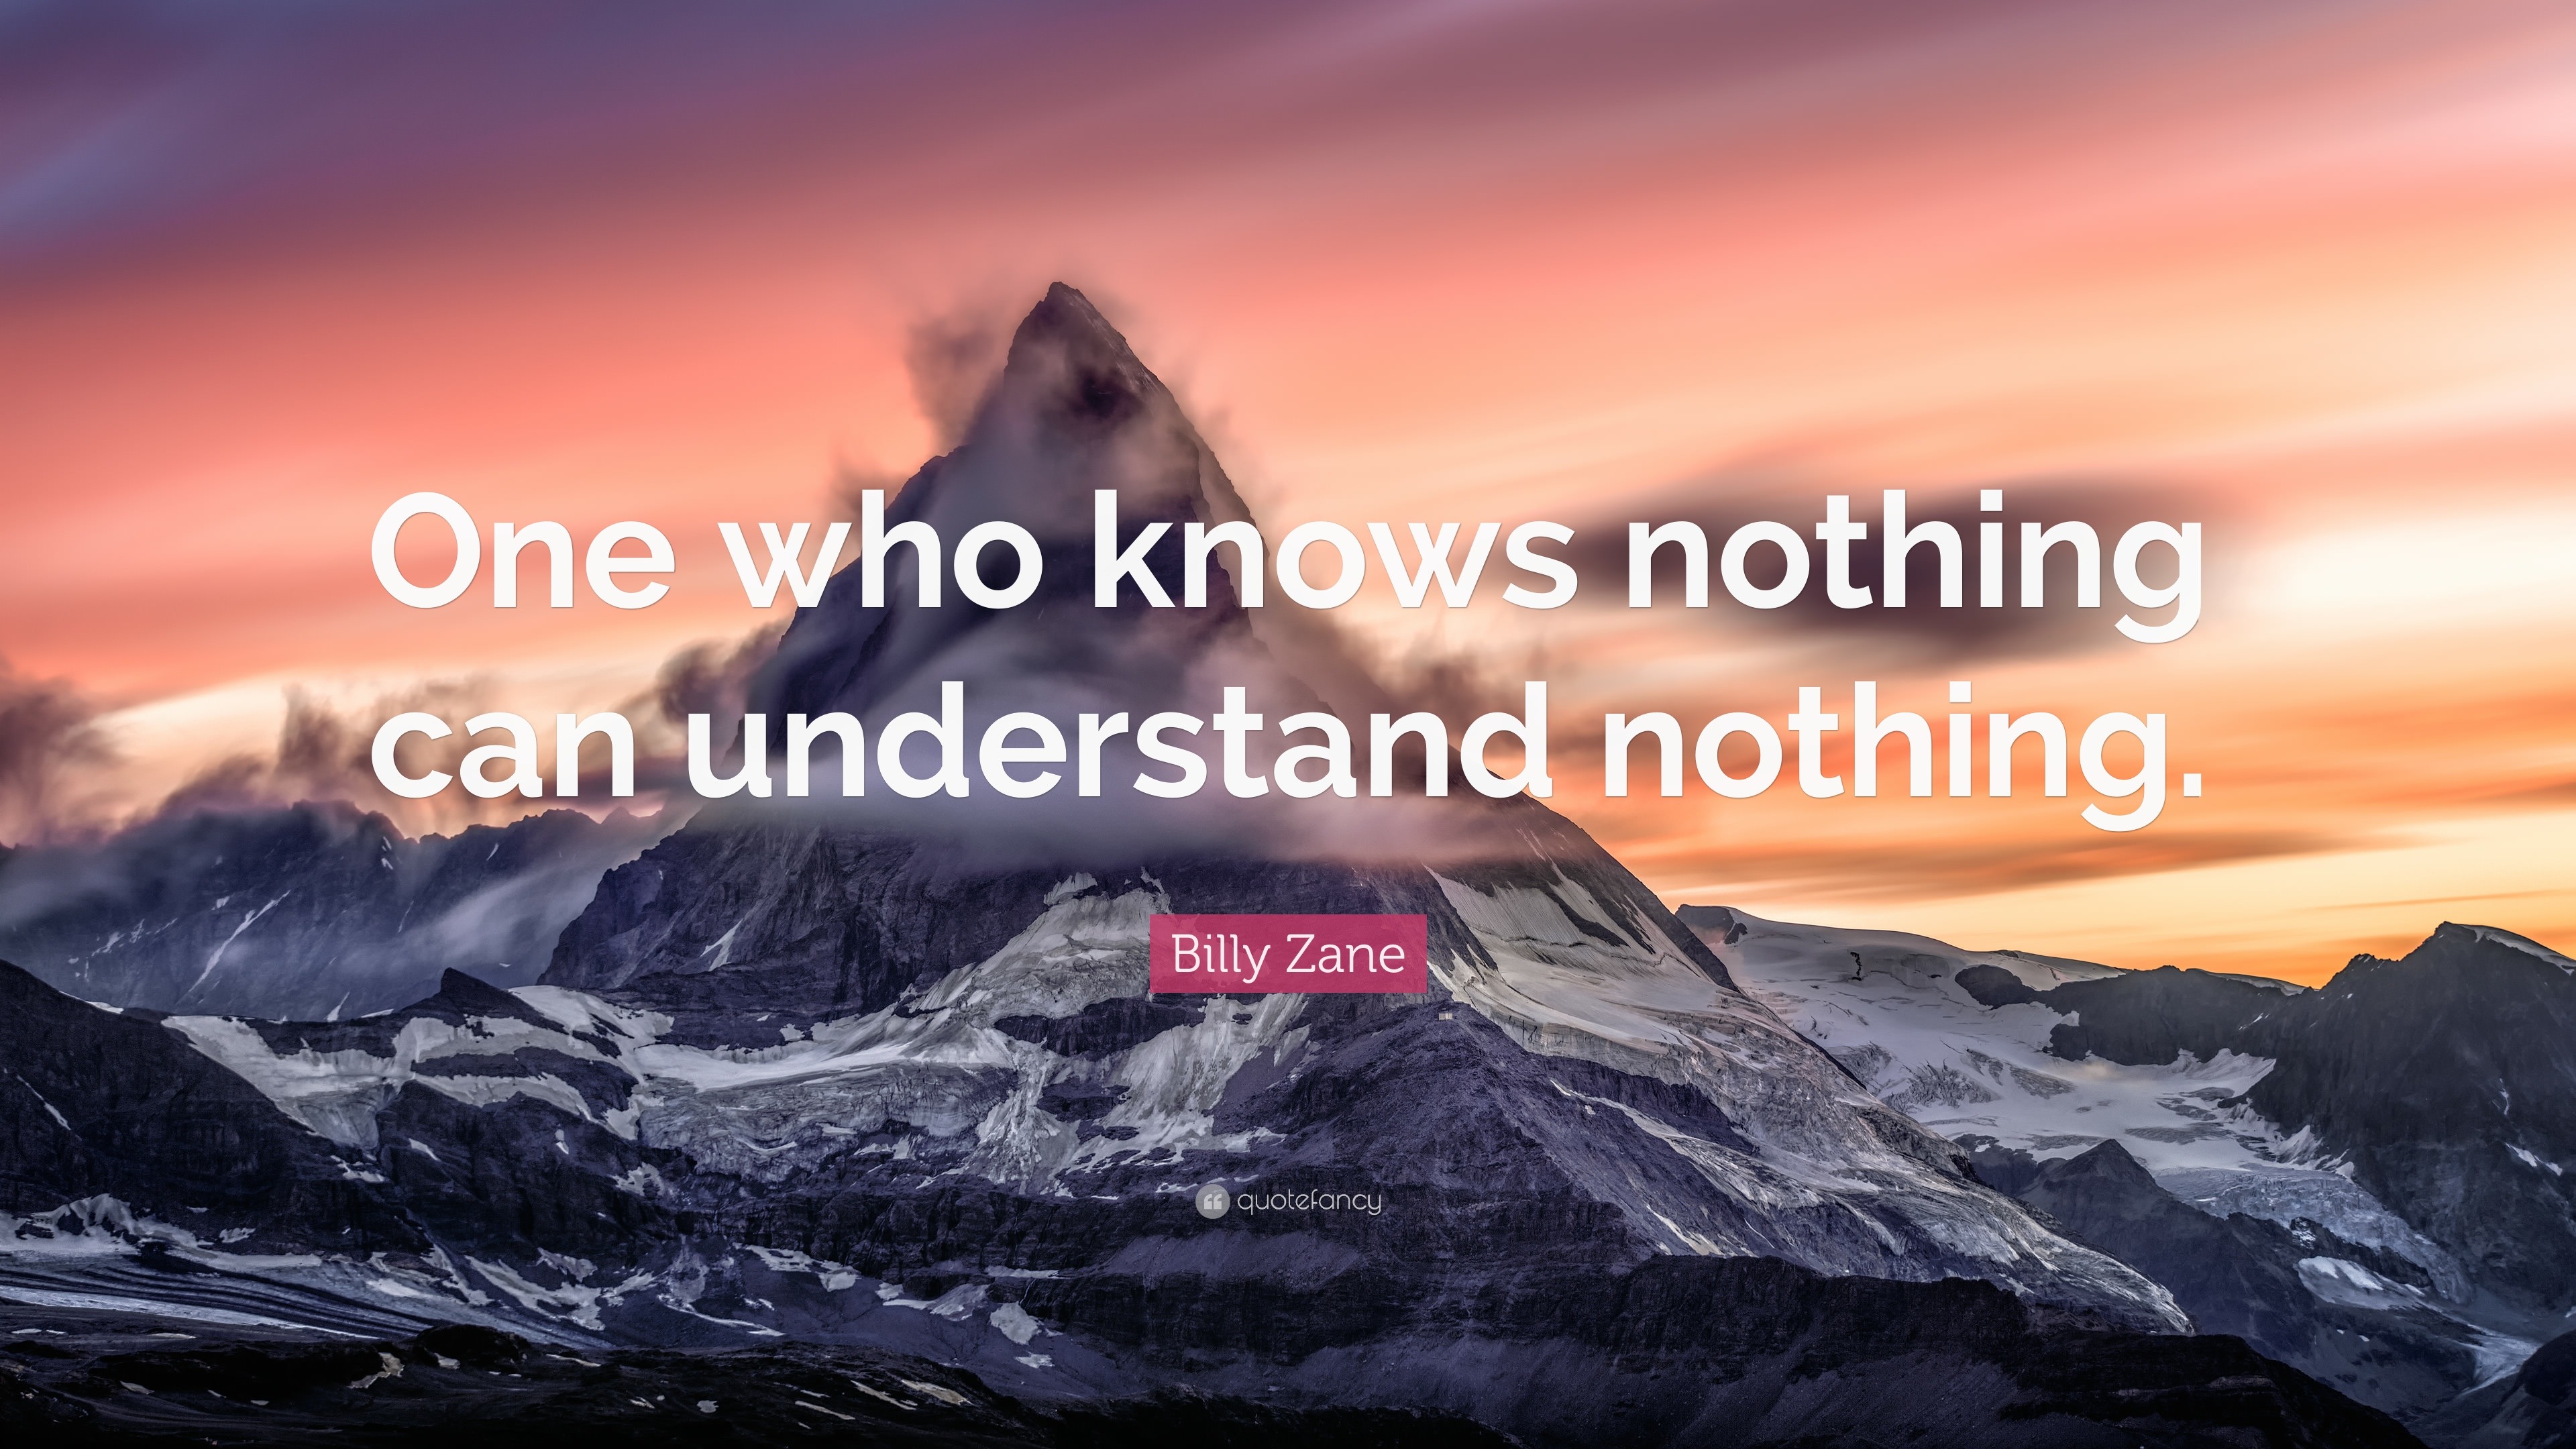 Billy Zane Quote: “One who knows nothing can understand nothing.”